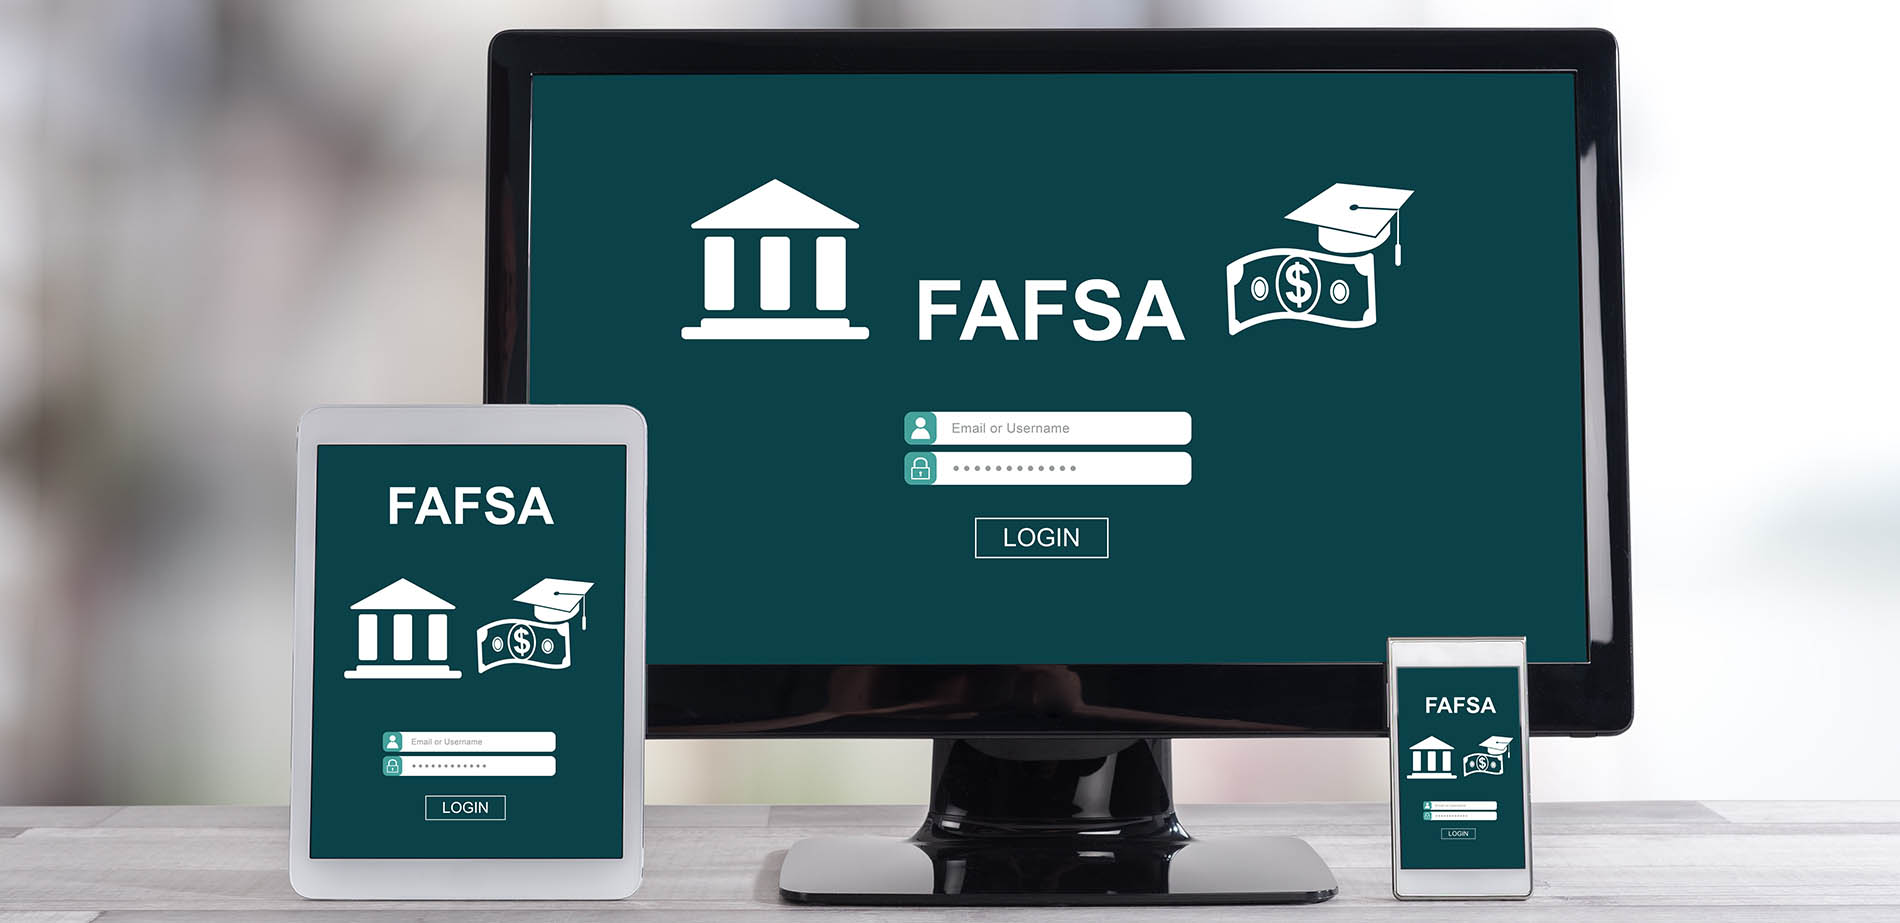 FAFSA screen on a laptop, tablet and smartphone